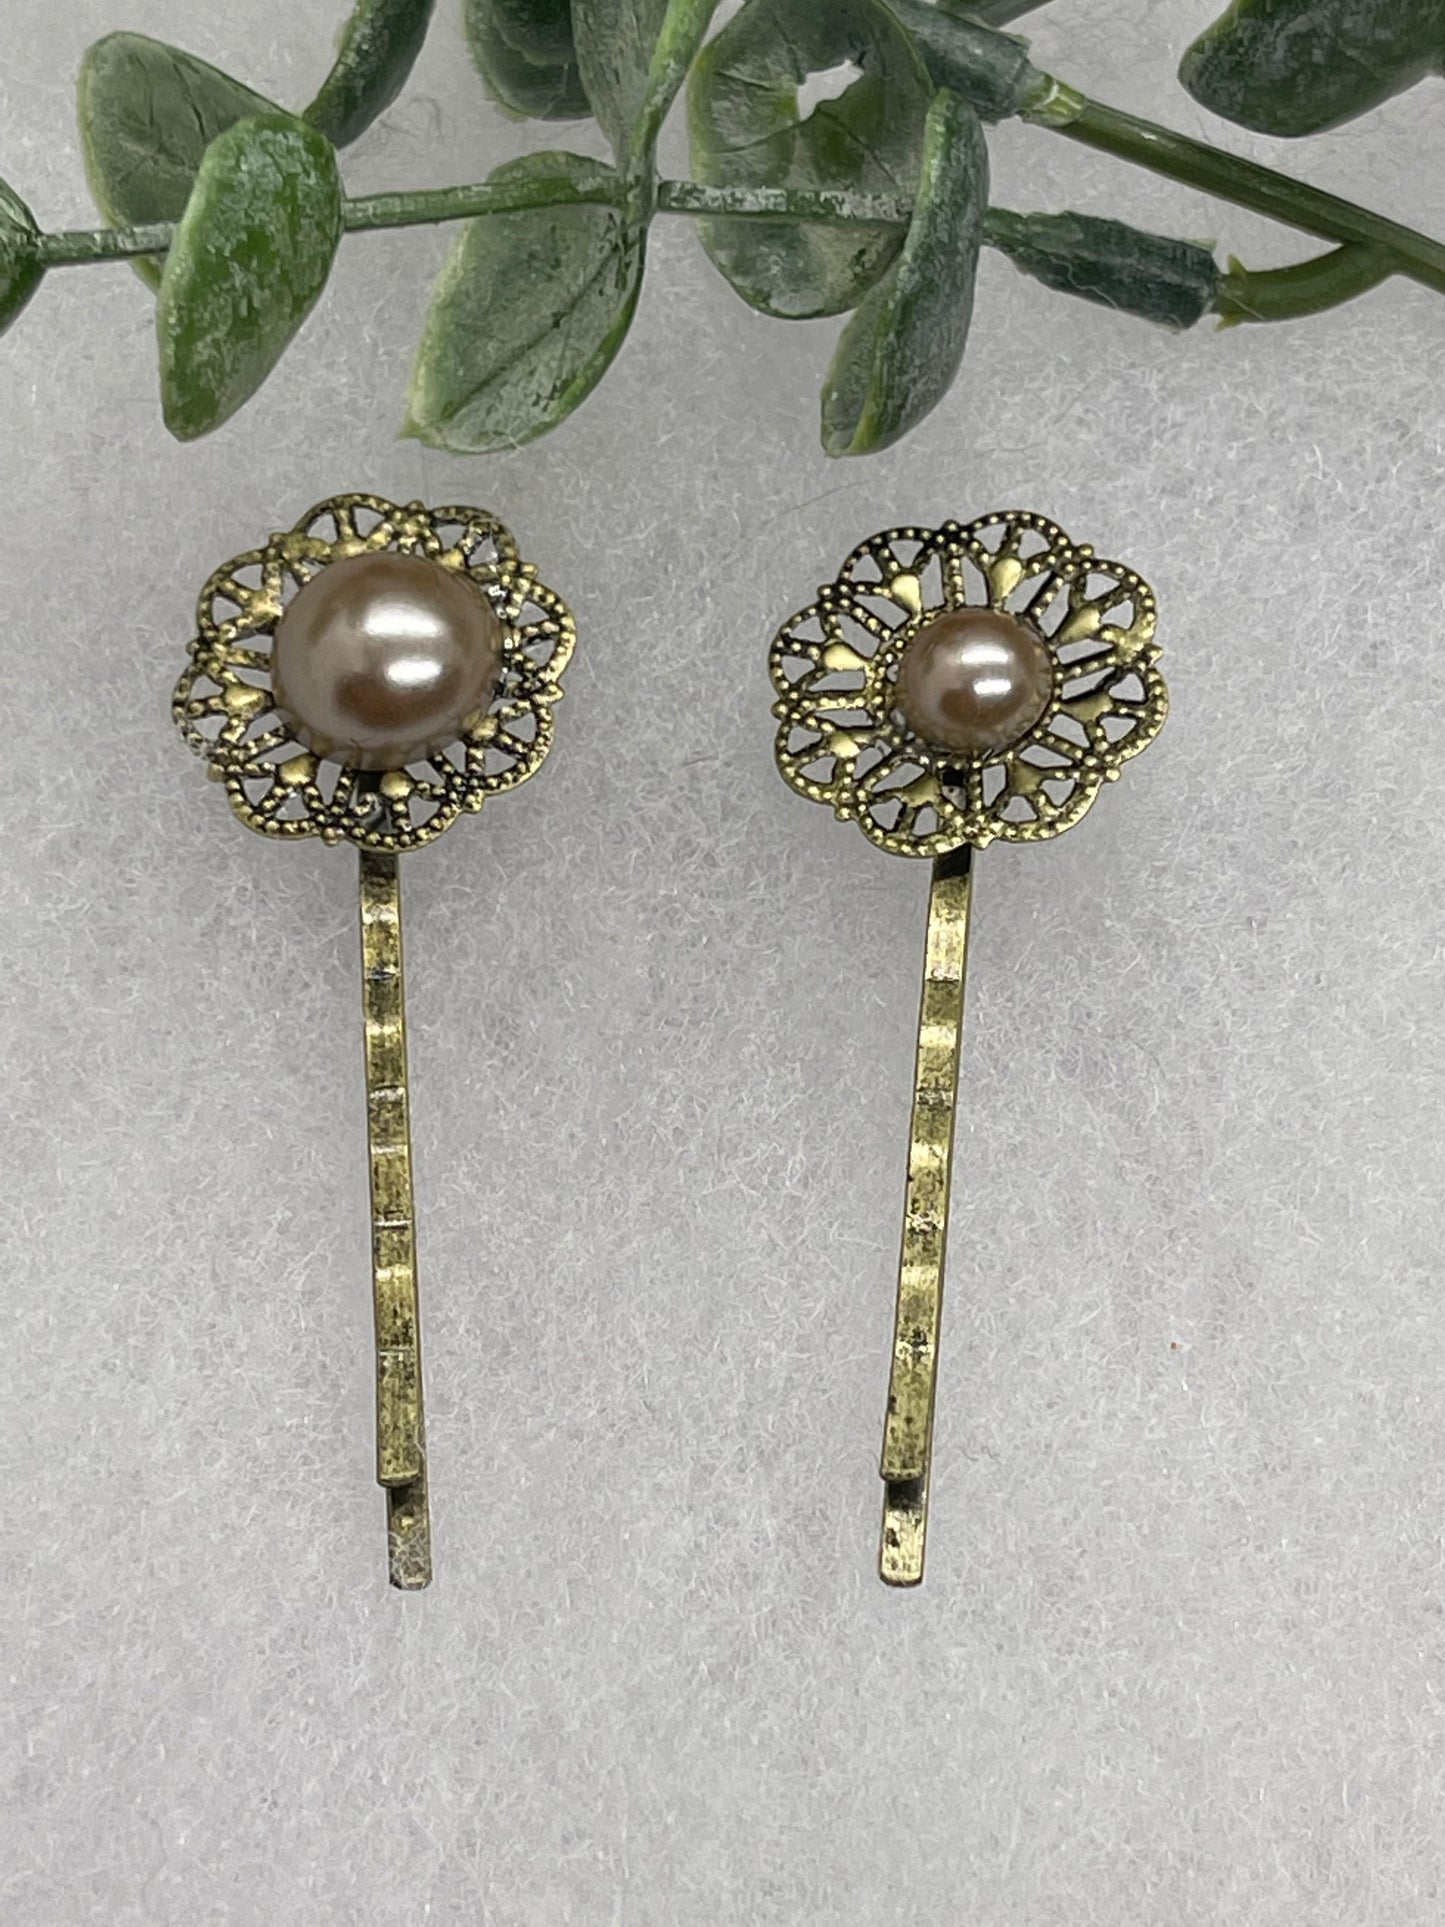 Champagne faux pearl 2pc set Antique vintage Style approximately 3.0” hair pin wedding